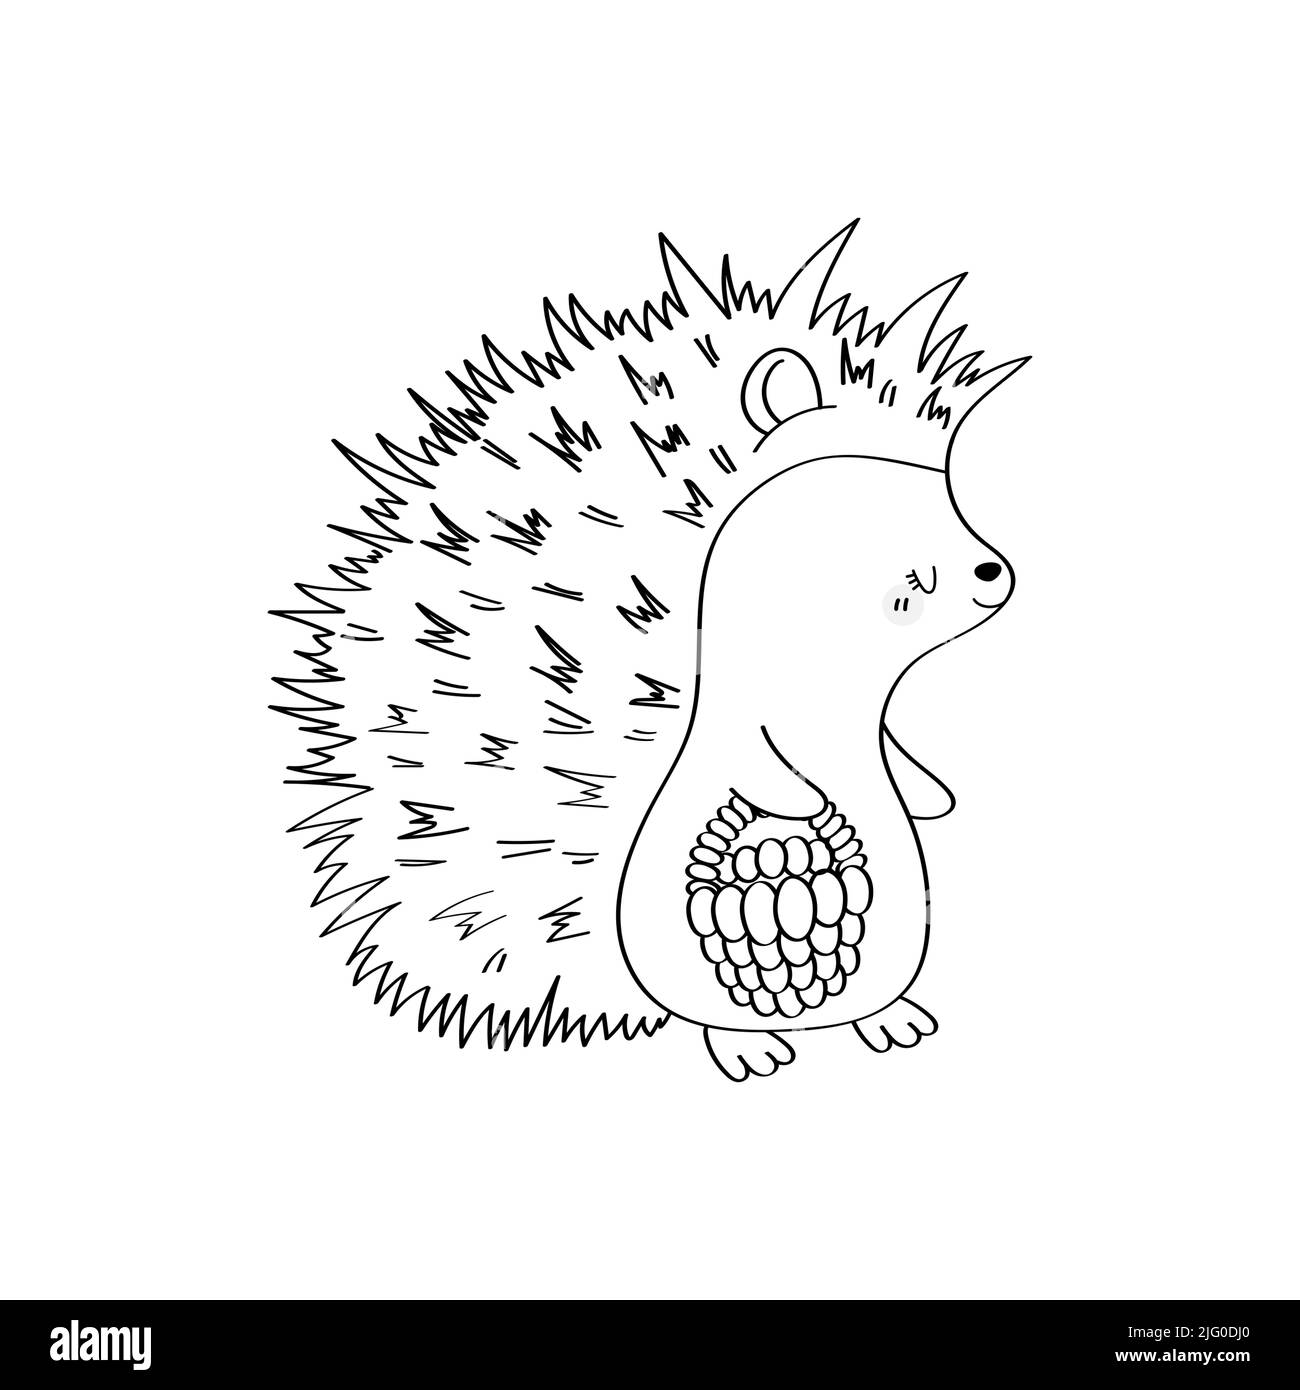 Clipart Hedgehog Black and White in Cartoon Style. Cute Clip Art Coloring Page Hedgehog . Vector Illustration of an Forest Animal for Stickers, Baby Stock Vector